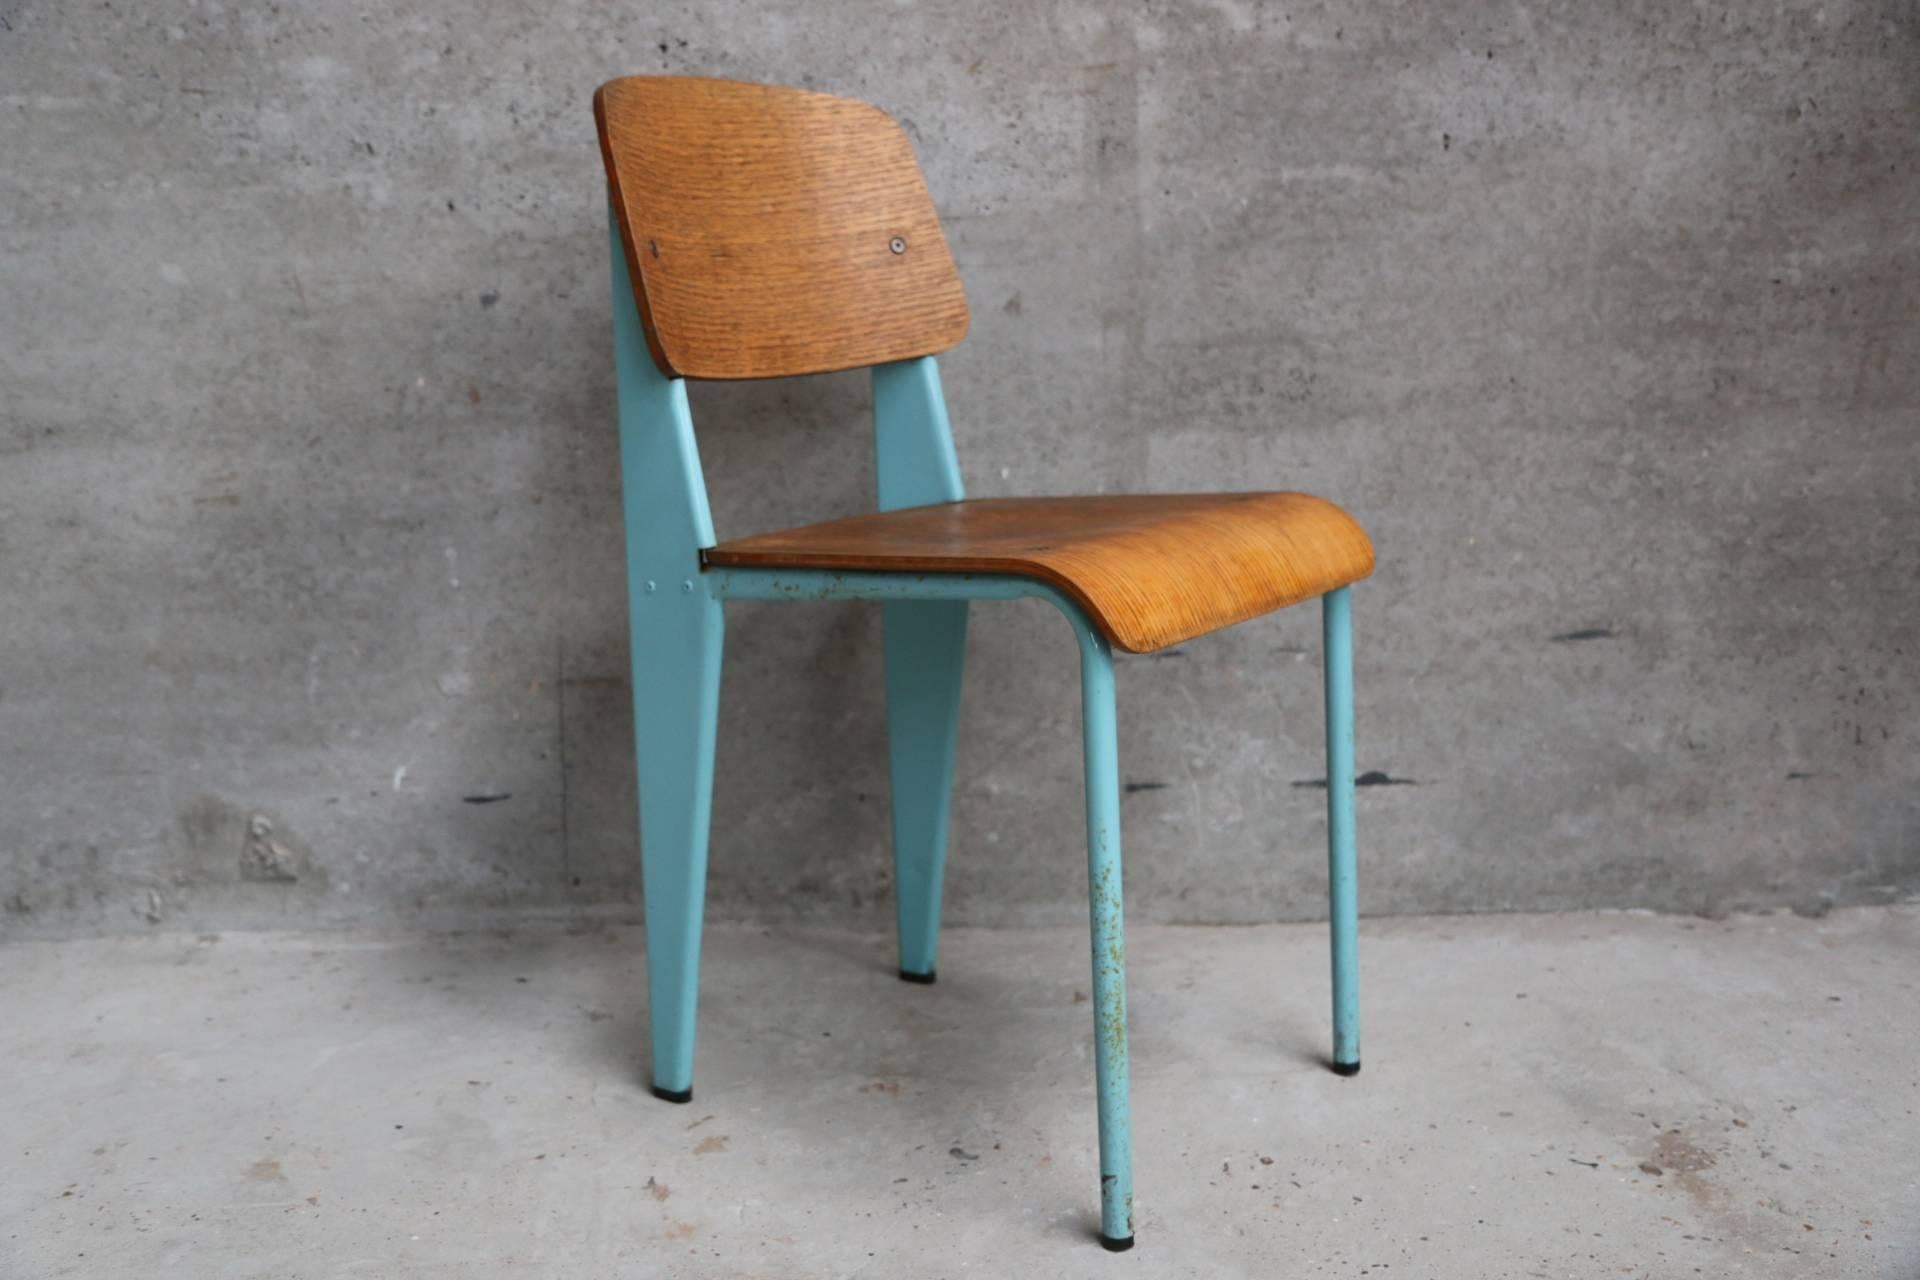 set of eight vintage Jean Prouve chairs in different colors all original, very rare and difficult to find a set of eight chairs like this. These chairs sell in auctions world wide for 5000-7000 euro a piece.

Model standard chair,.